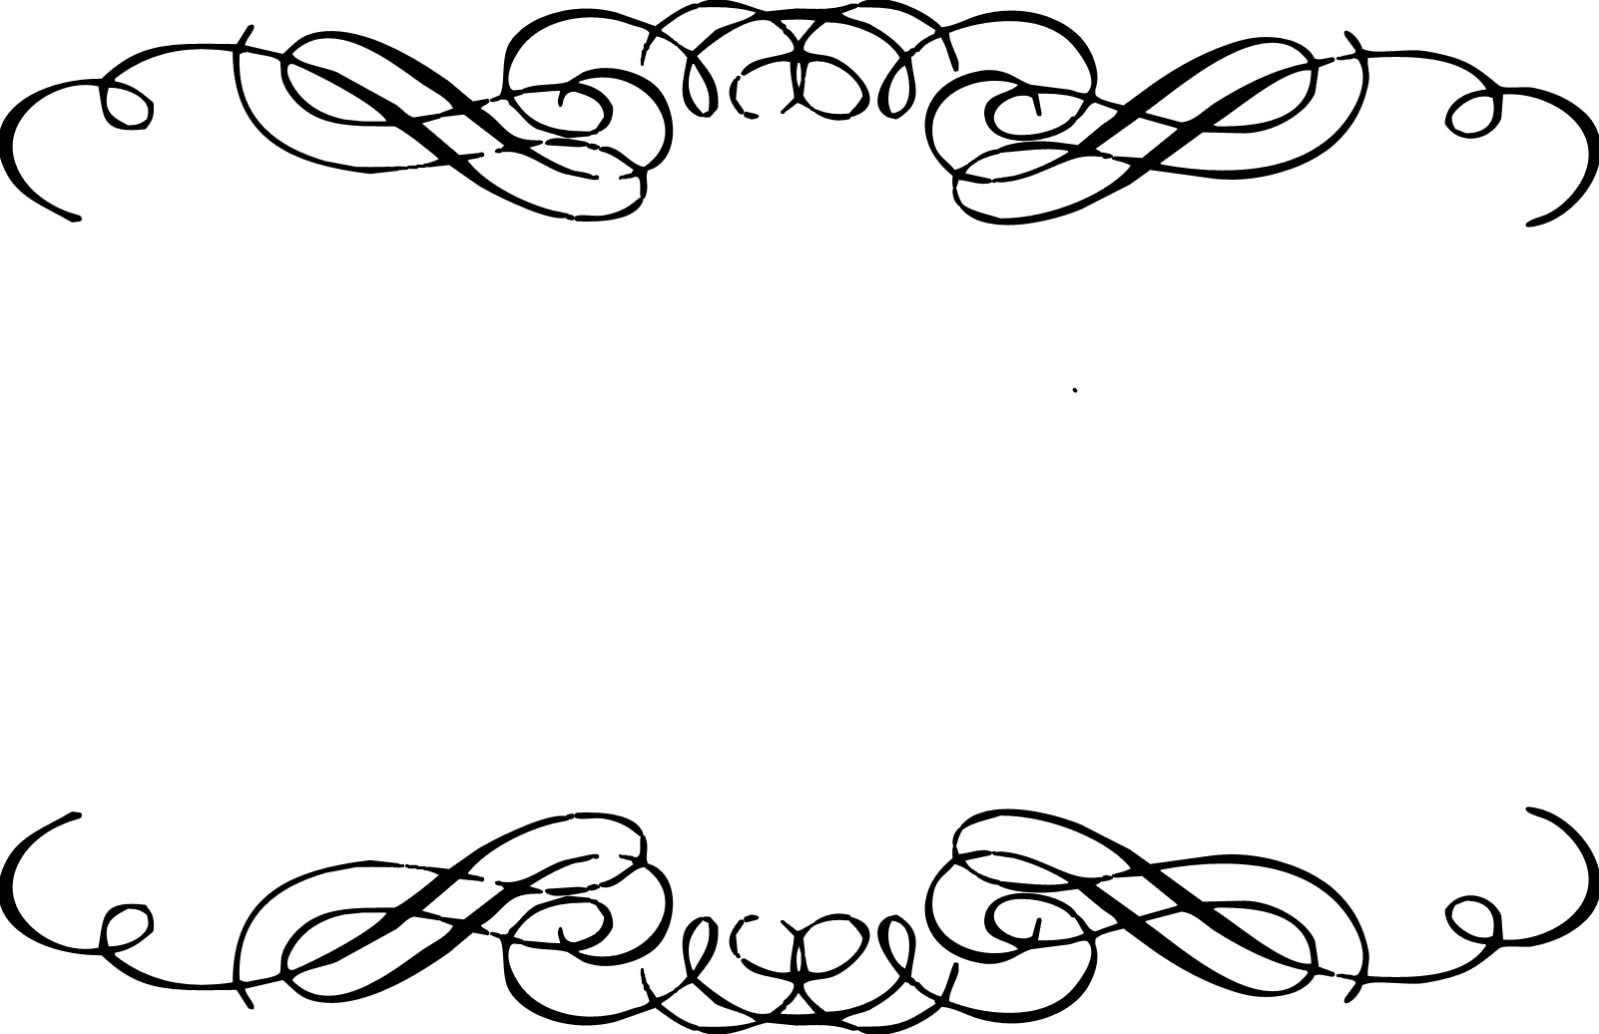 Floral Scroll Frame Clip Art Free Download - ClipArt Best